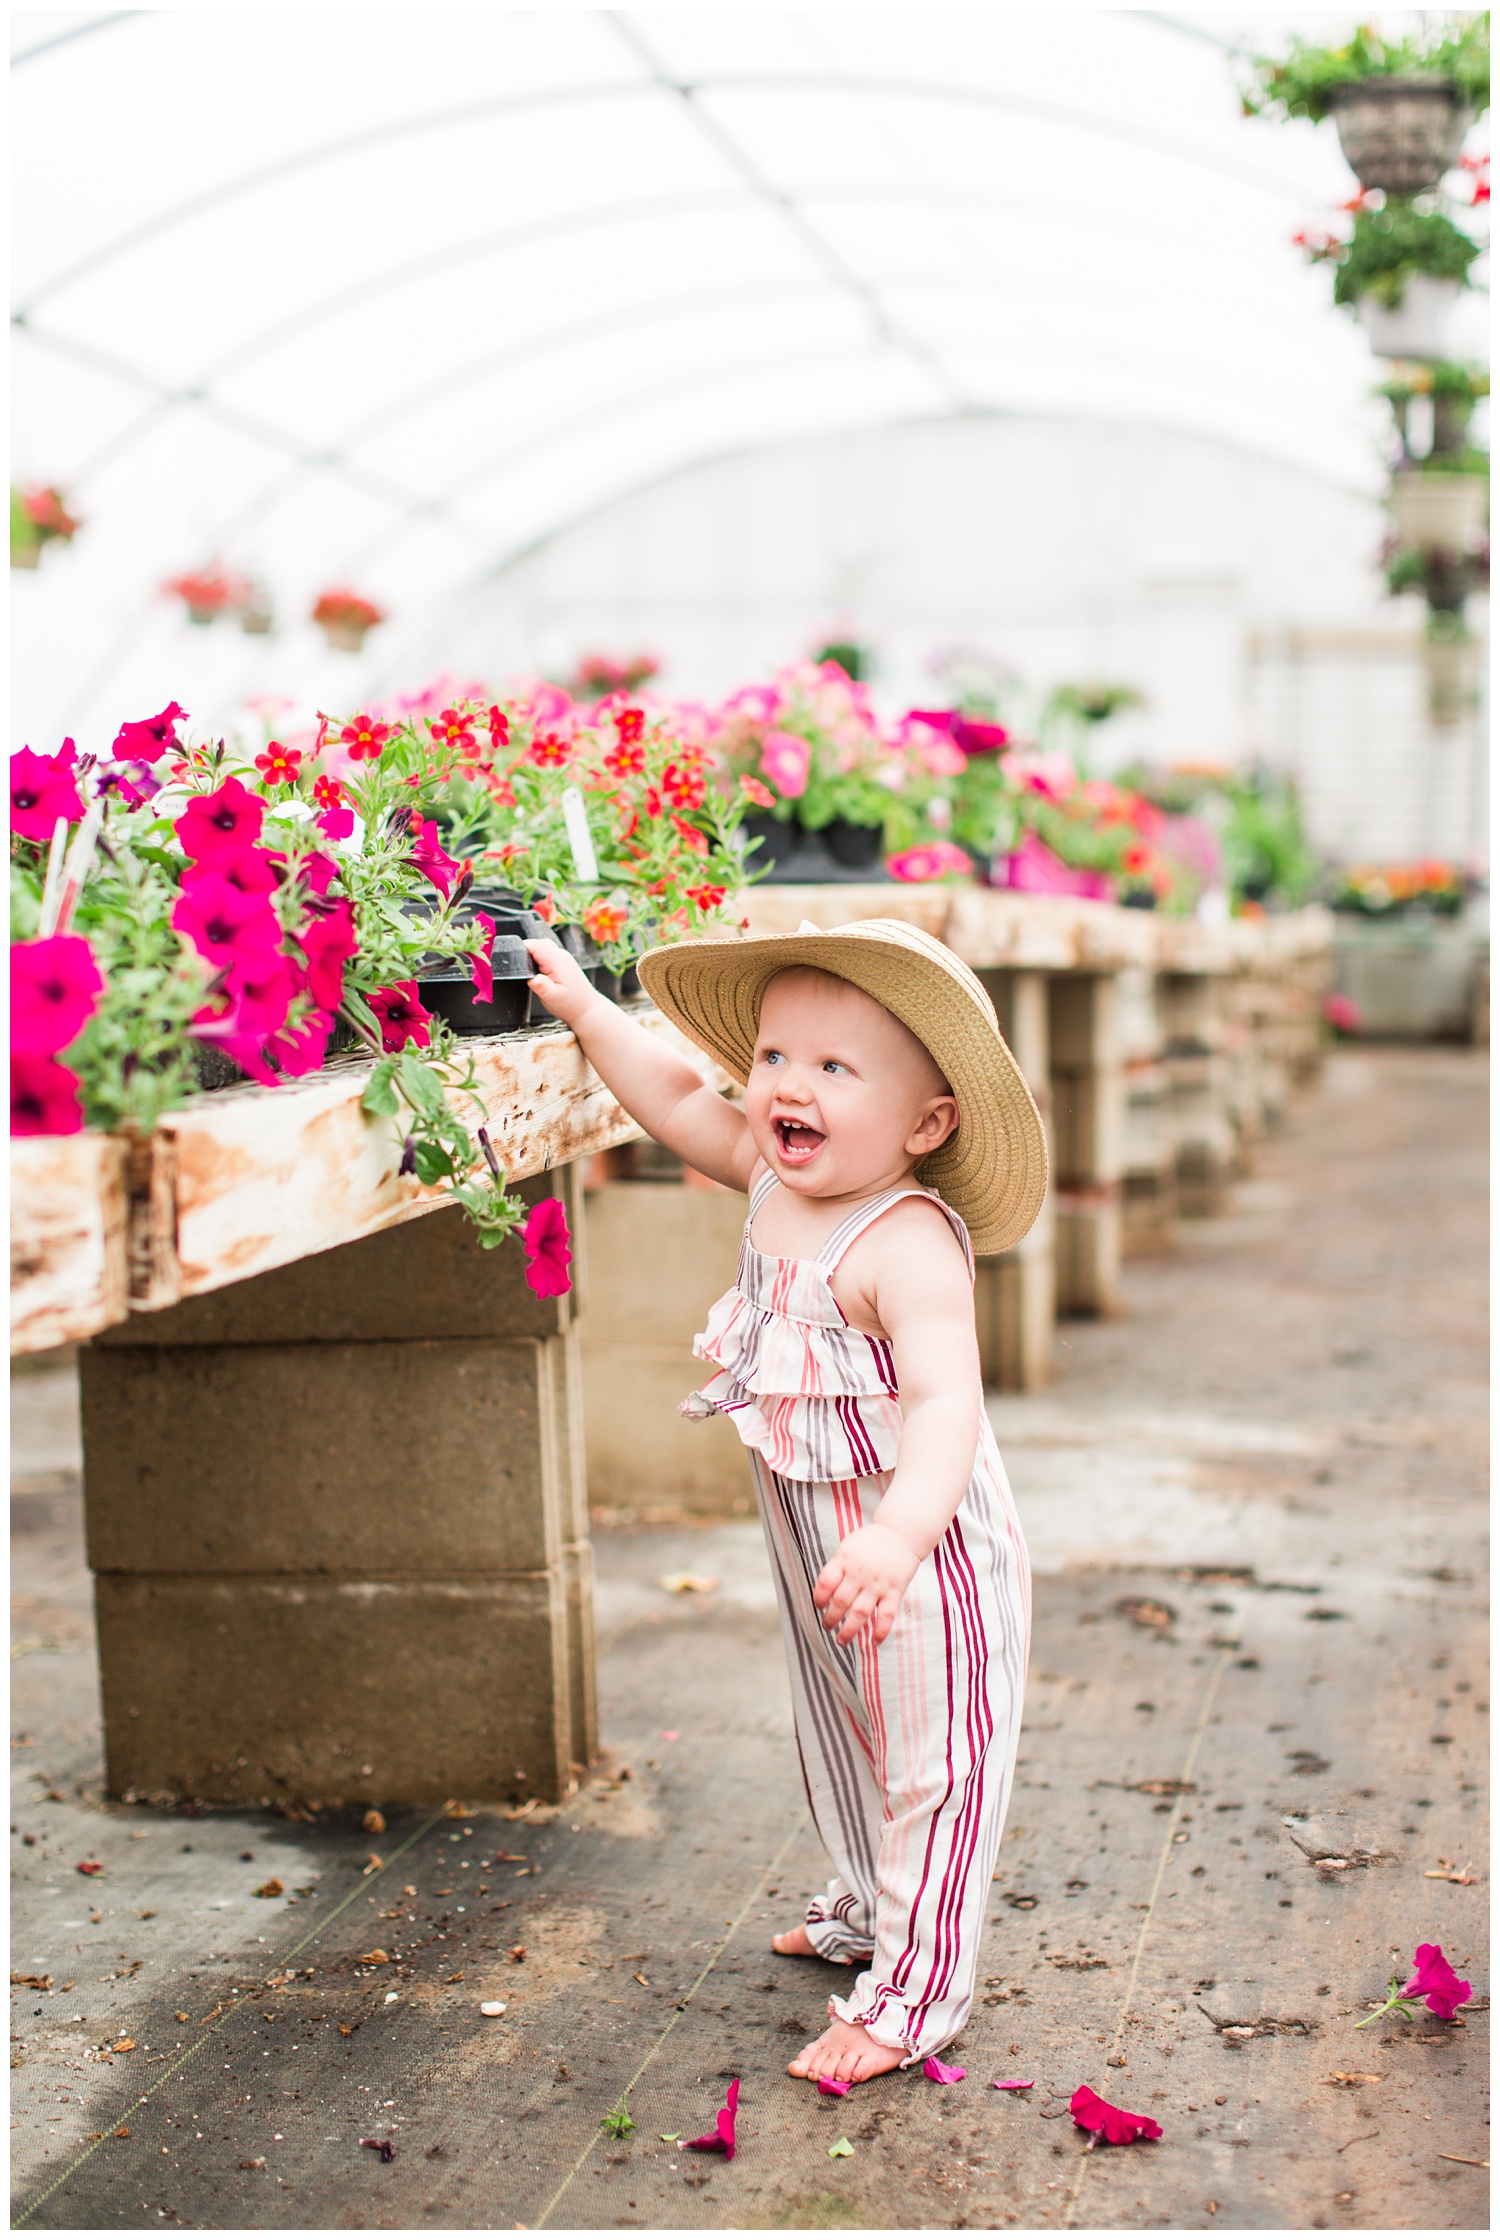 Baby Ivy standing along side florals in a greenhouse wearing a fun floppy hat.